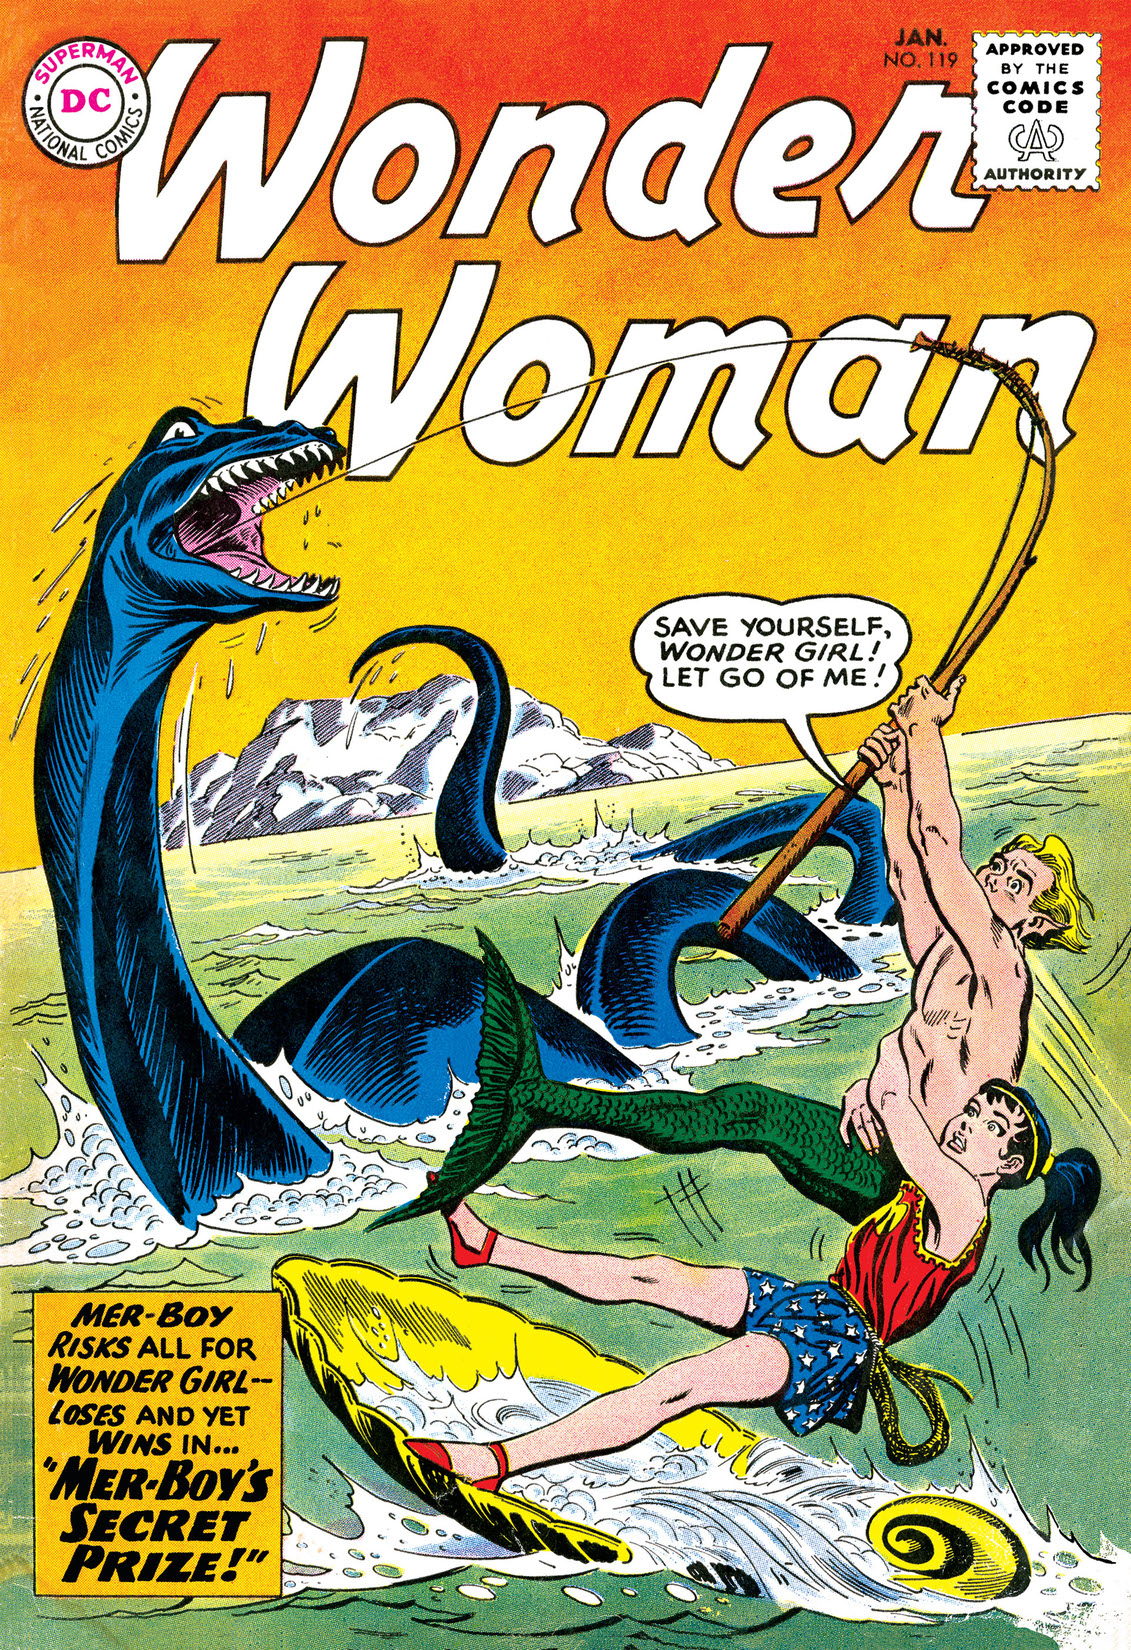 Wonder Woman (1942-) #119 preview images